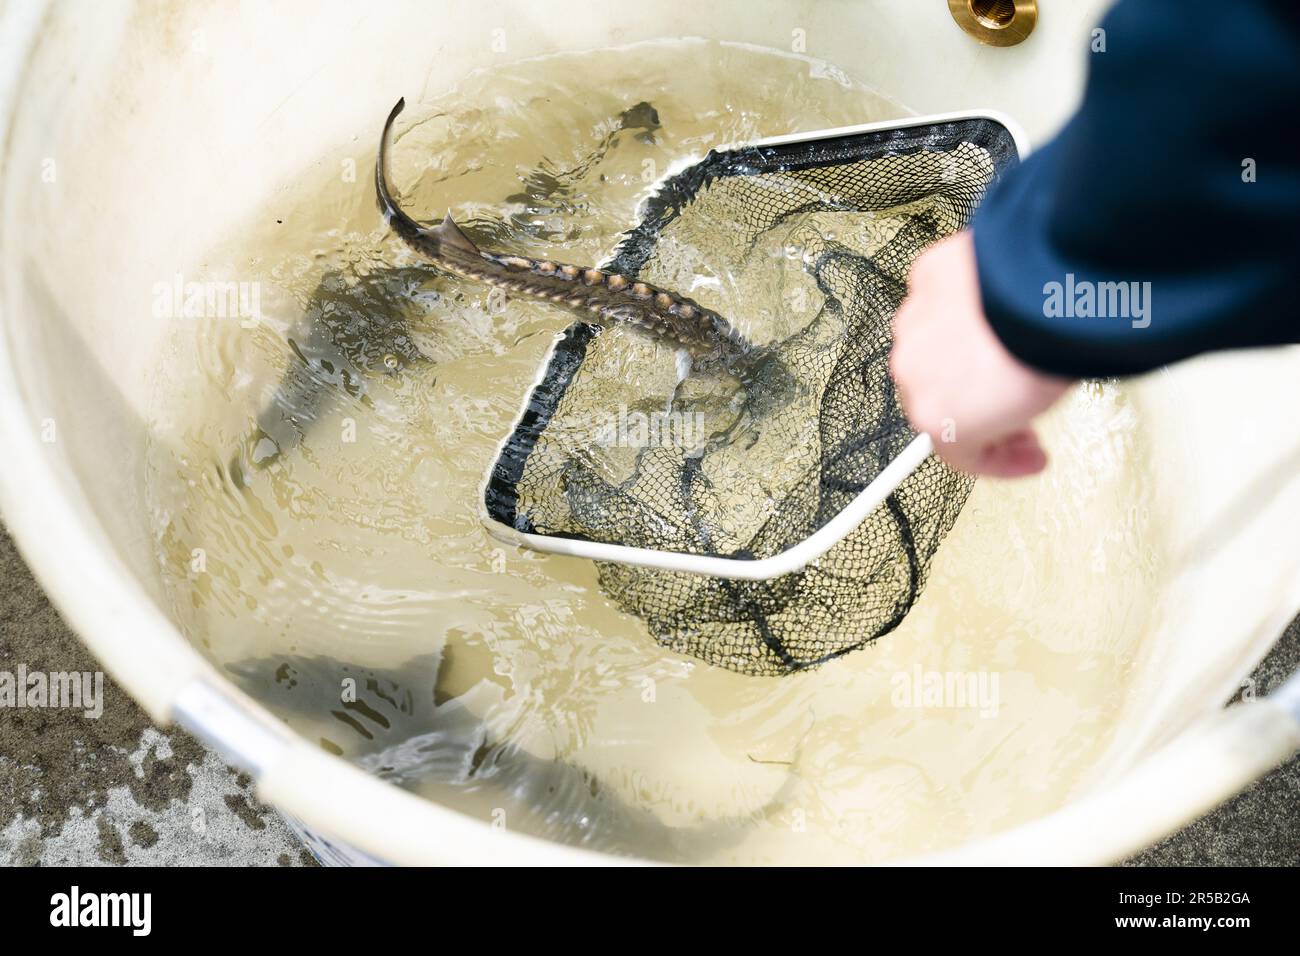 WERKENDAM - Sturgeons in a tank prior to release into the water of De Biesbosch National Park. The release and tracking of the tagged animals is an important step in exploring the possibility of reintroduction of this fish species. ANP JEROEN JUMELET netherlands out - belgium out Stock Photo